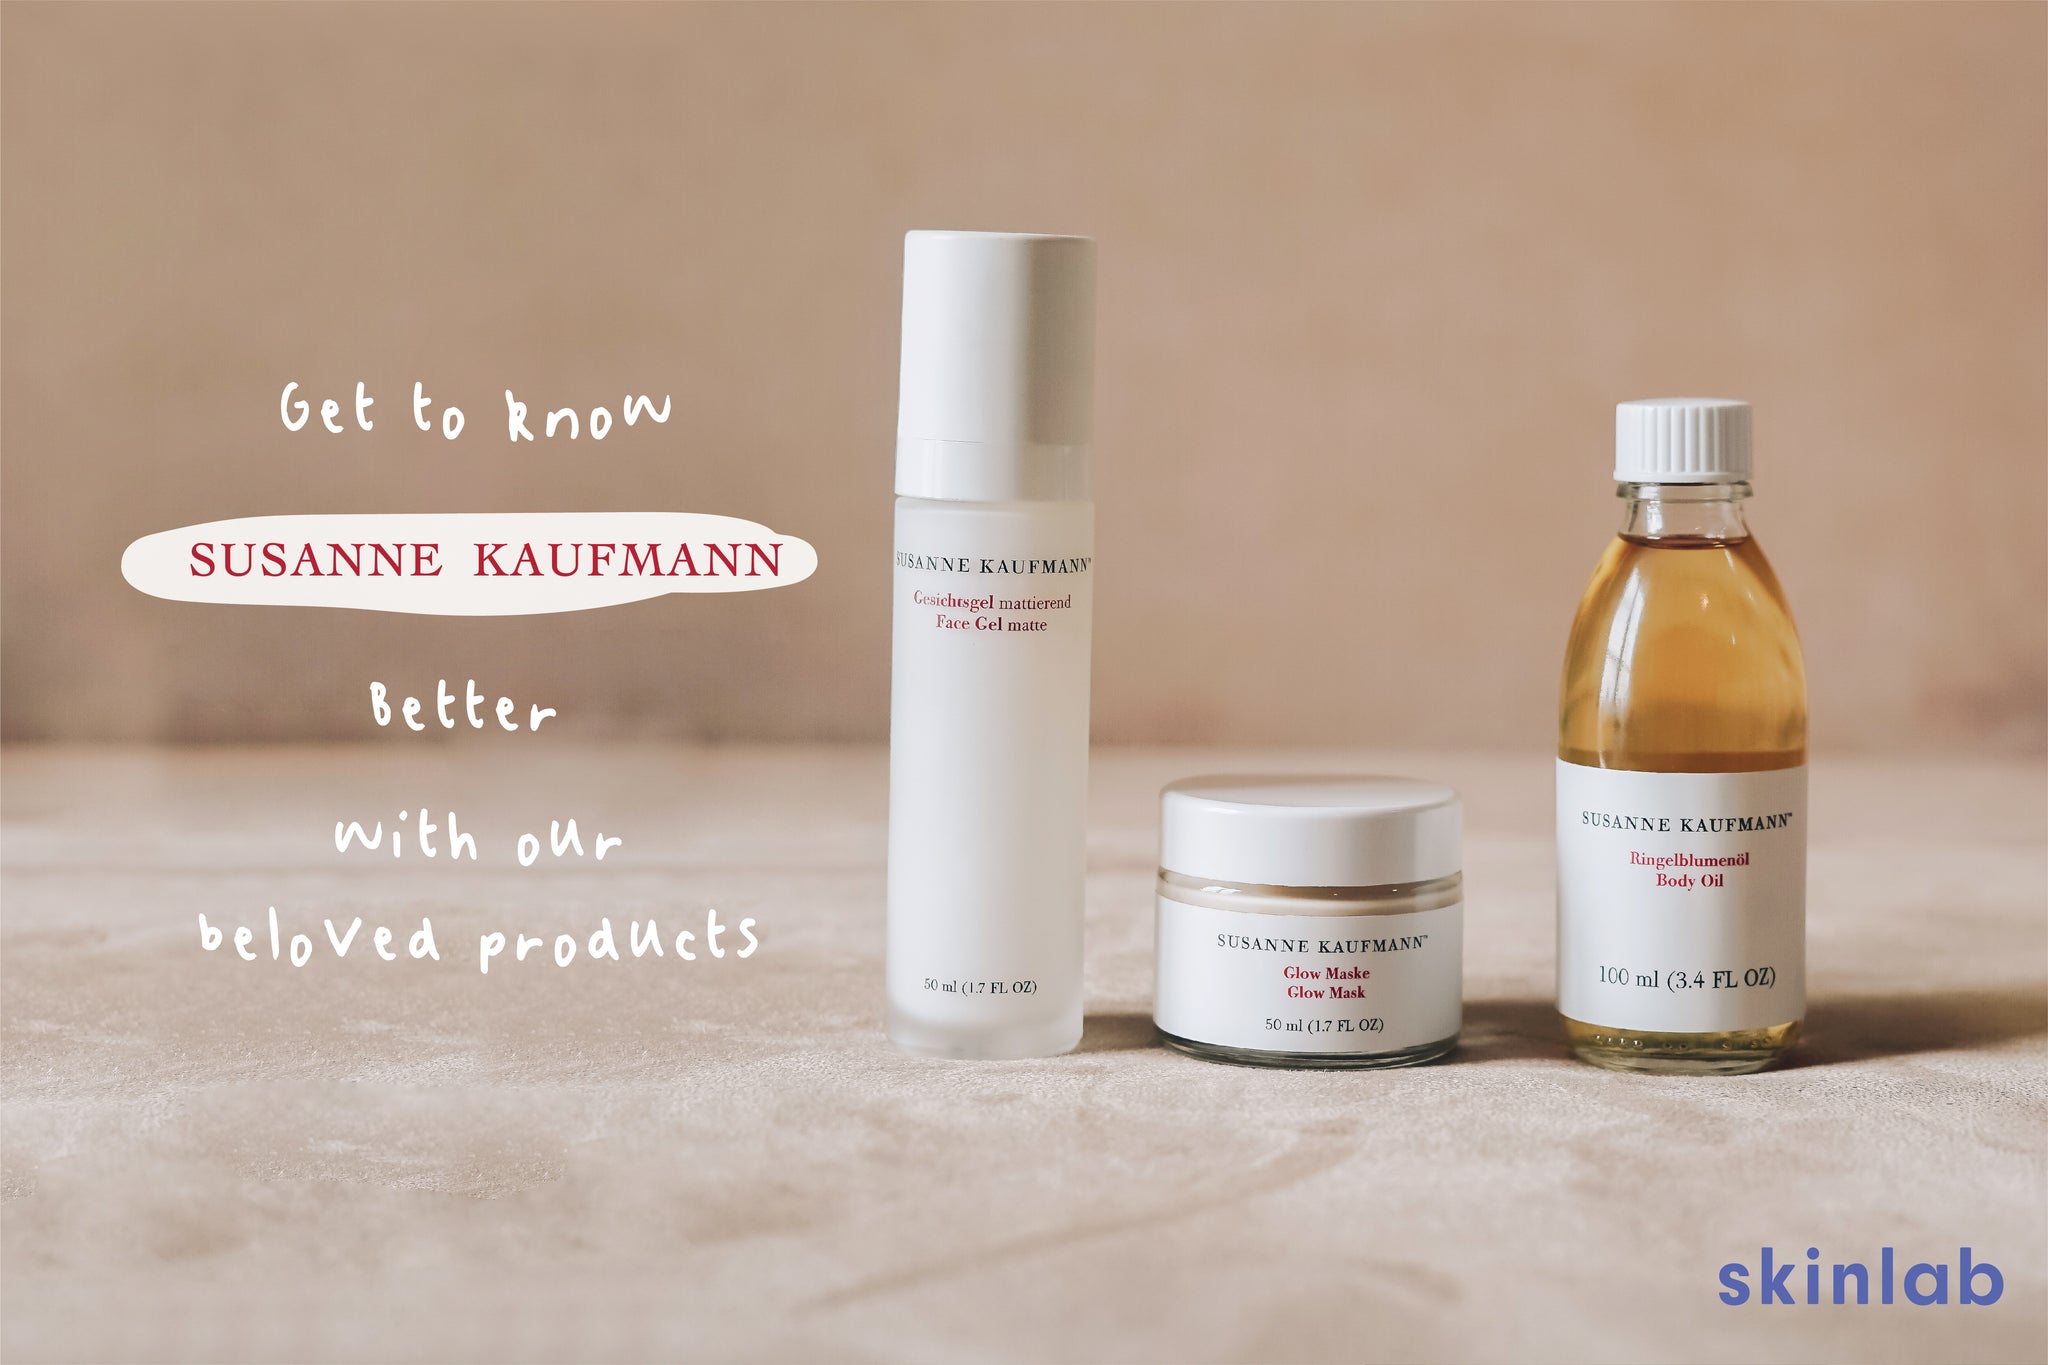 Get to know Susanne Kaufmann better with our Beloved Products